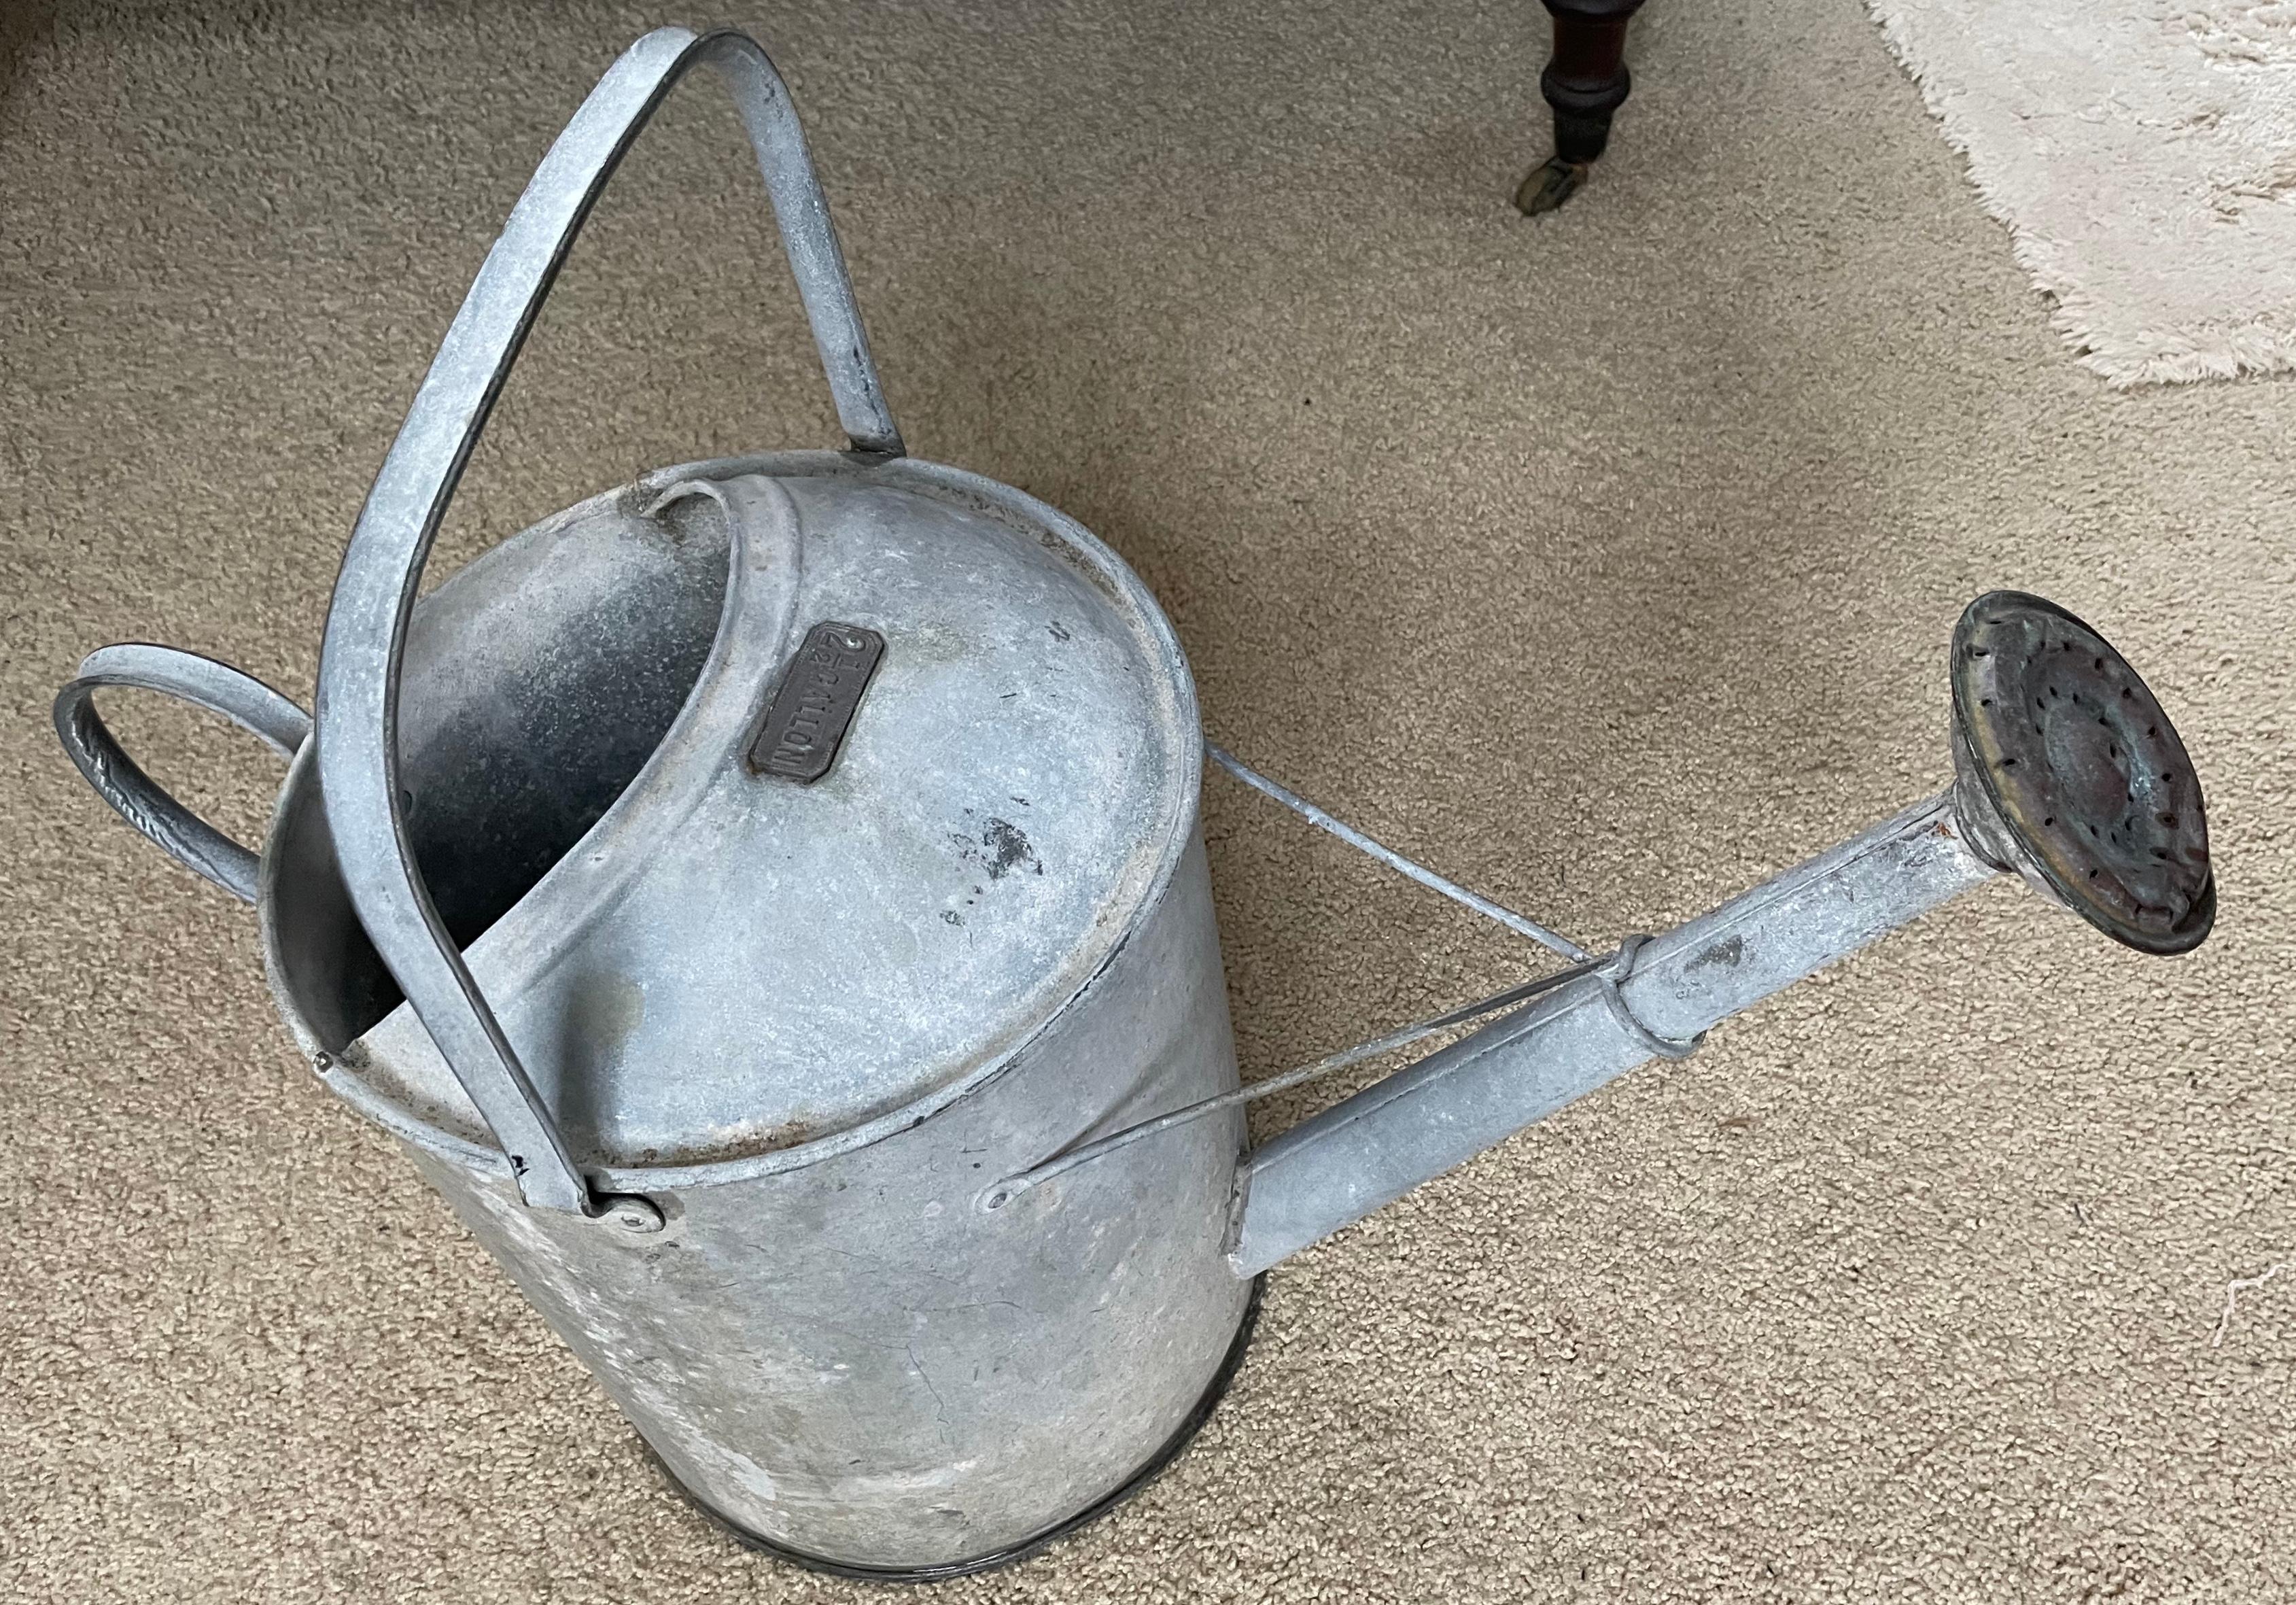 Zinc watering can. Large decorative vintage American 2.5 gallon watering can to be filled with overflowing spring snd summer blooms or for watering tasks. Perfectly functional can for larger watering chores in the garden with pinhole leak somewhere